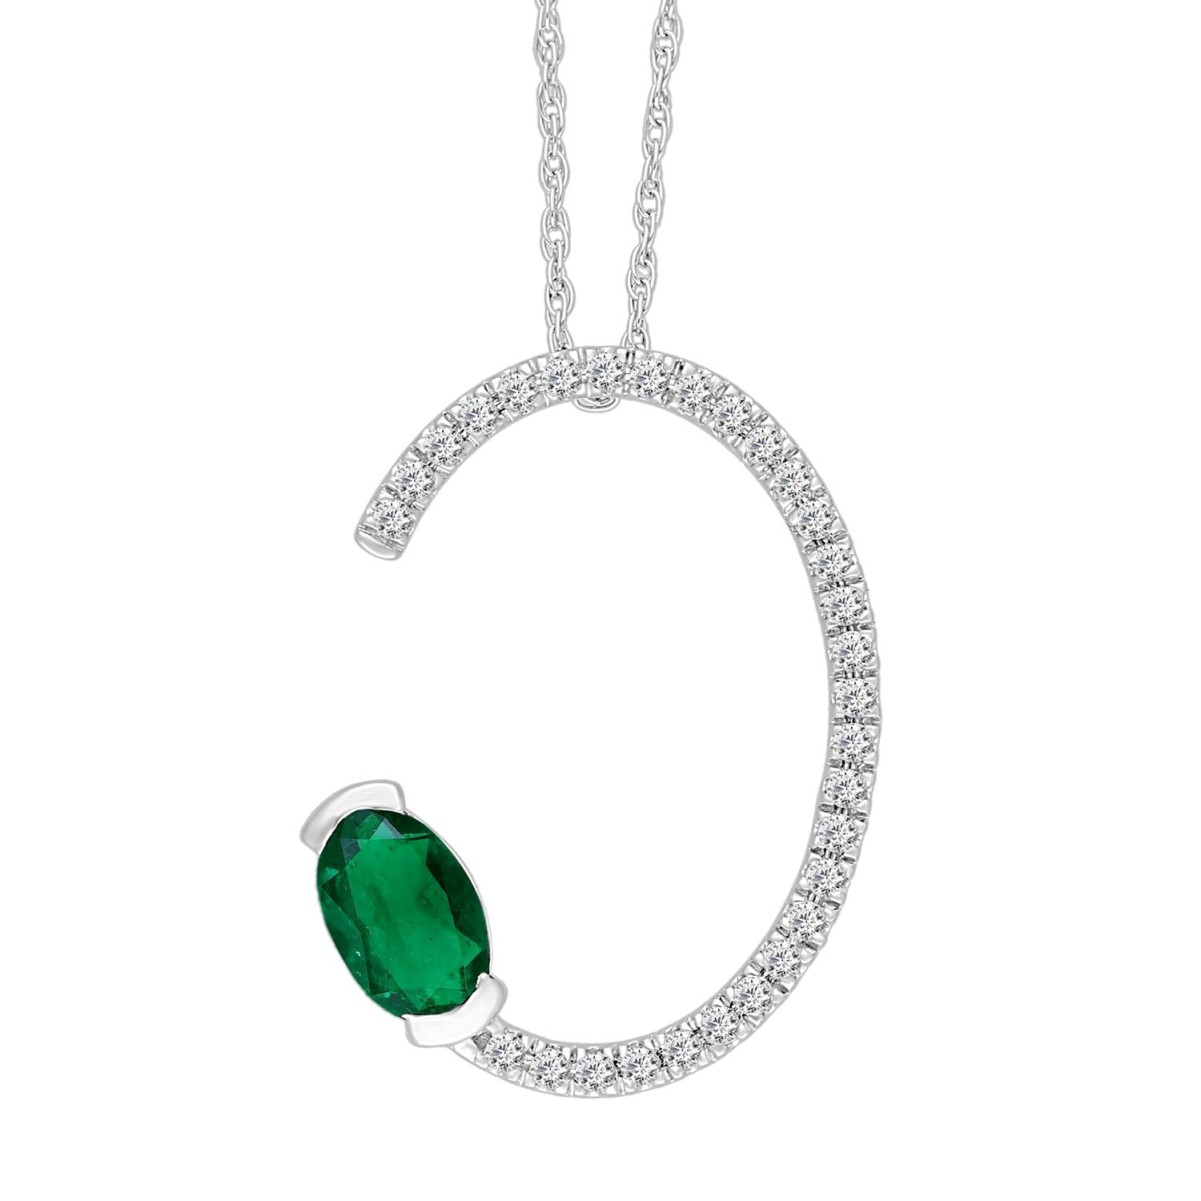 14K WHITE GOLD 5/8CT ROUND/OVAL DIAMOND LADIES PENDANT WITH CHAIN(COLOR STONE OVAL GREEN EMERALD DIAMOND 1/2CT)